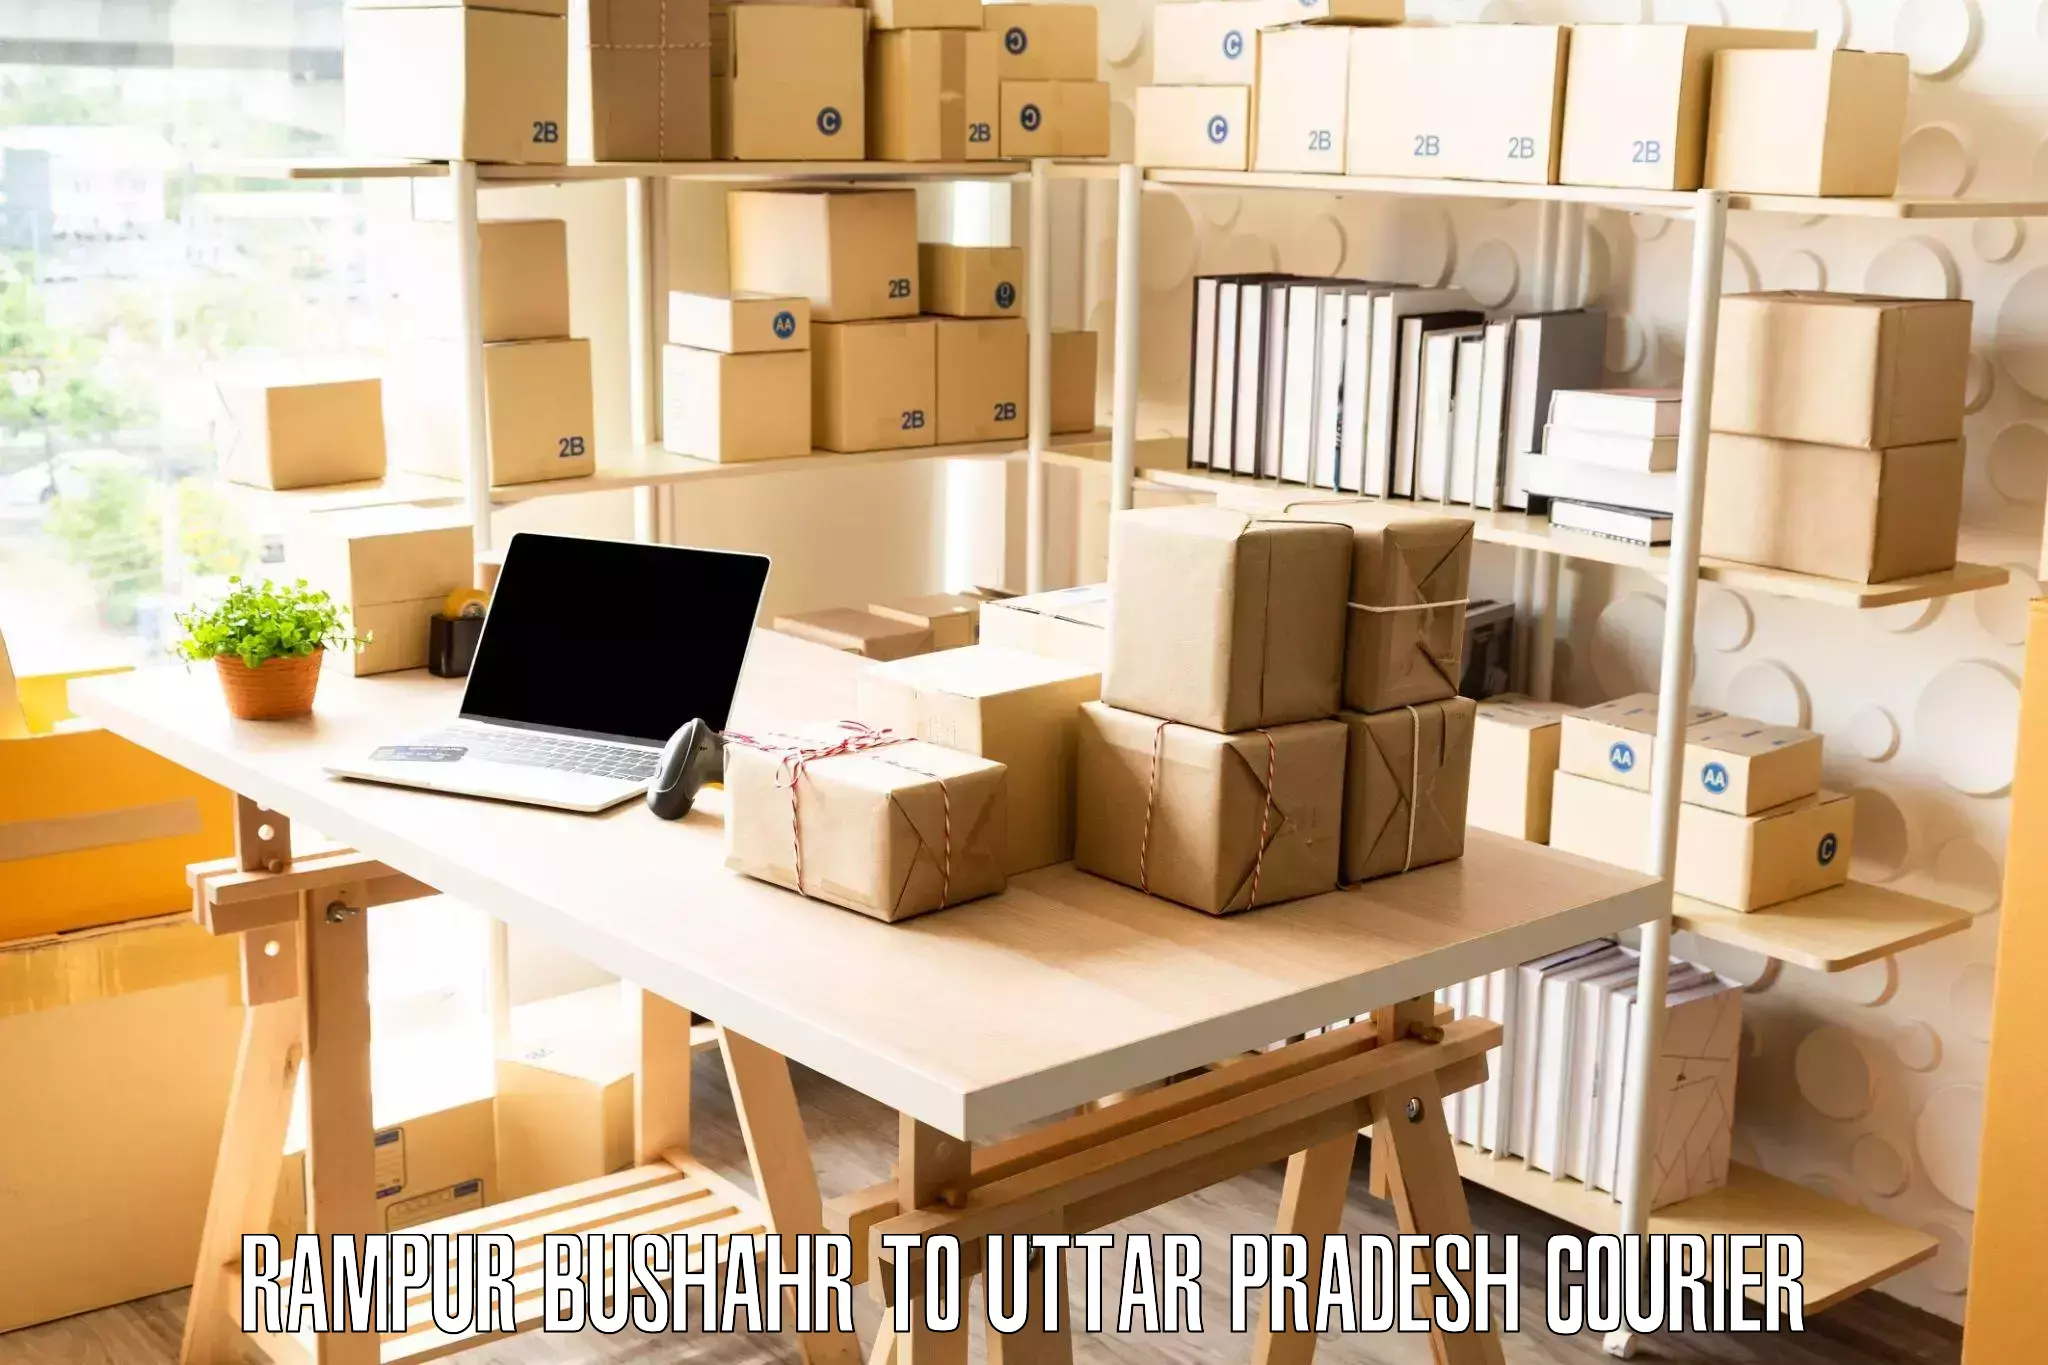 Expert goods movers Rampur Bushahr to Khutar